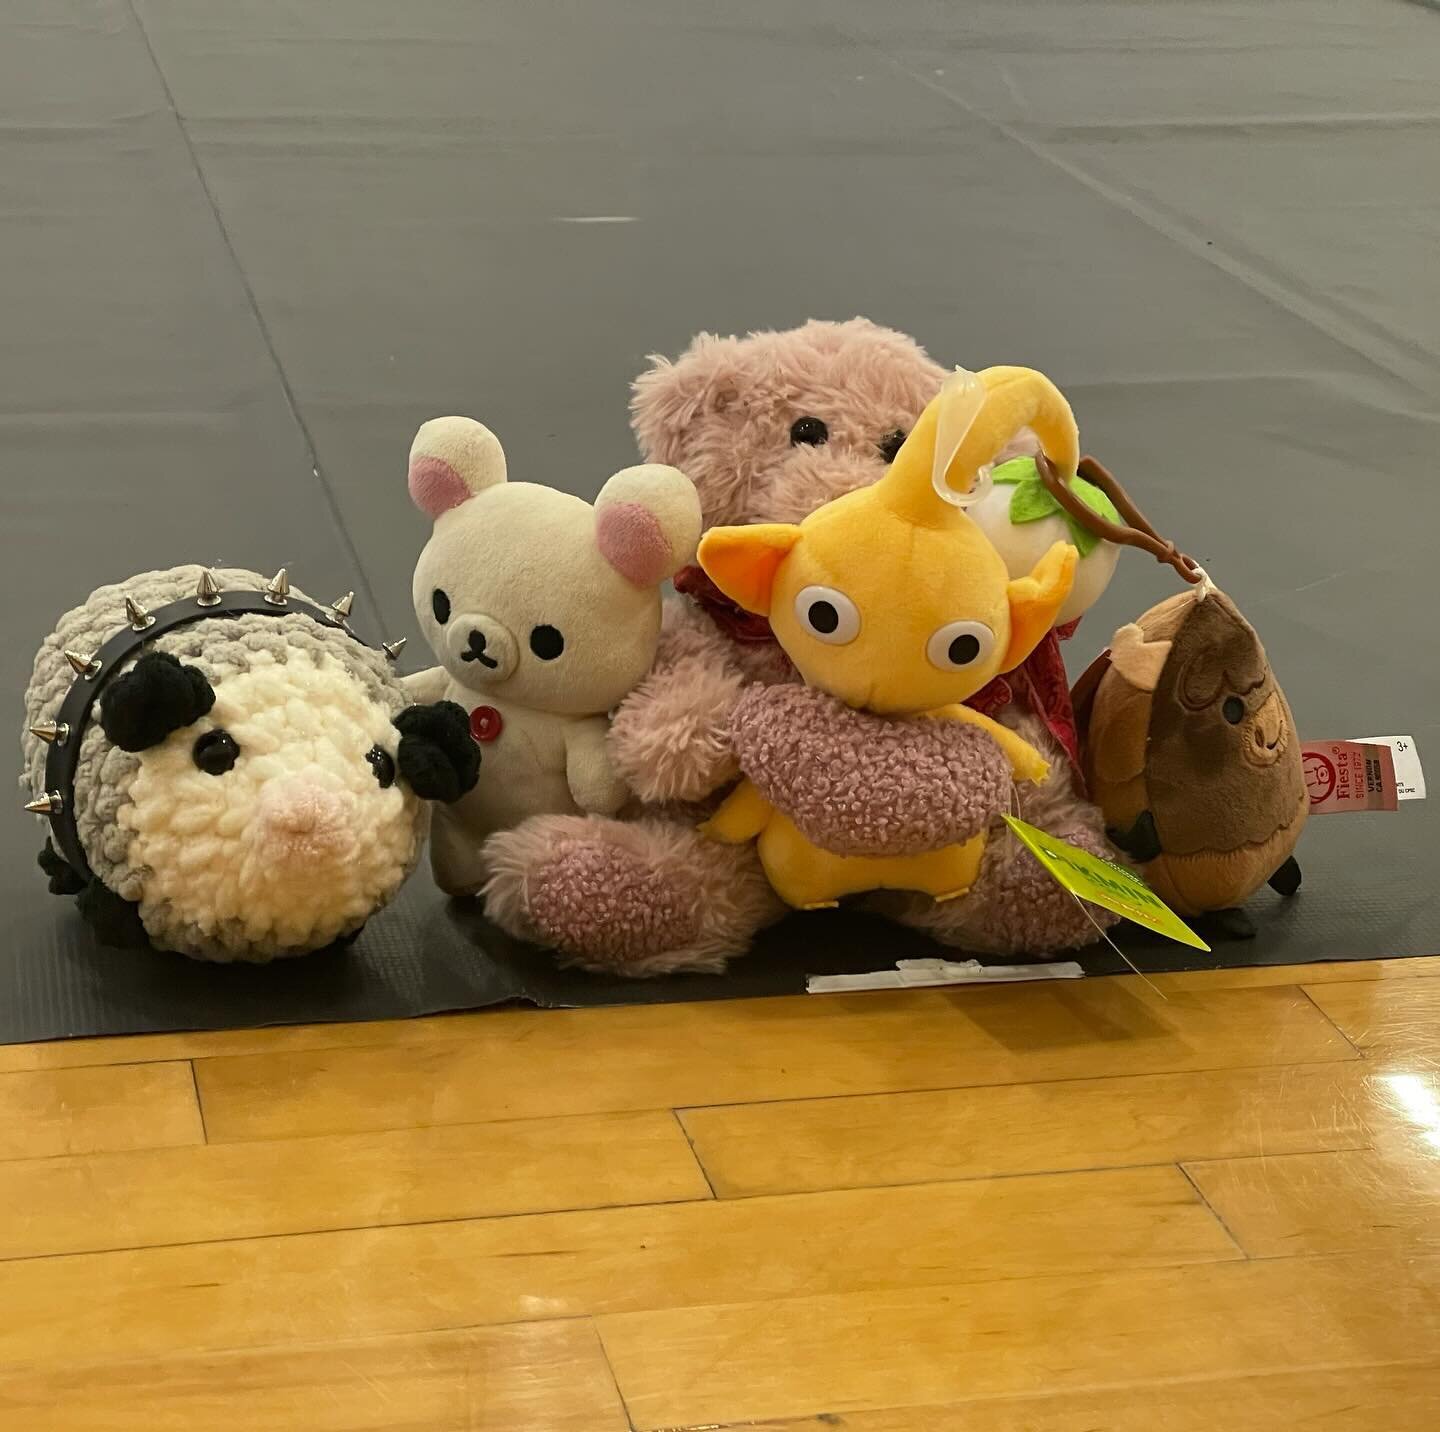 Who (or what) is your 50 mark? This is our little stuffie family! (left to right) Killer the Possum, Button (white bear), Marvin (pink bear), Yellow Pikmin, The Moose 

#winterguard #colorguard #wgi #wgi2024 #winterguardlove #colorguardlove #pnw